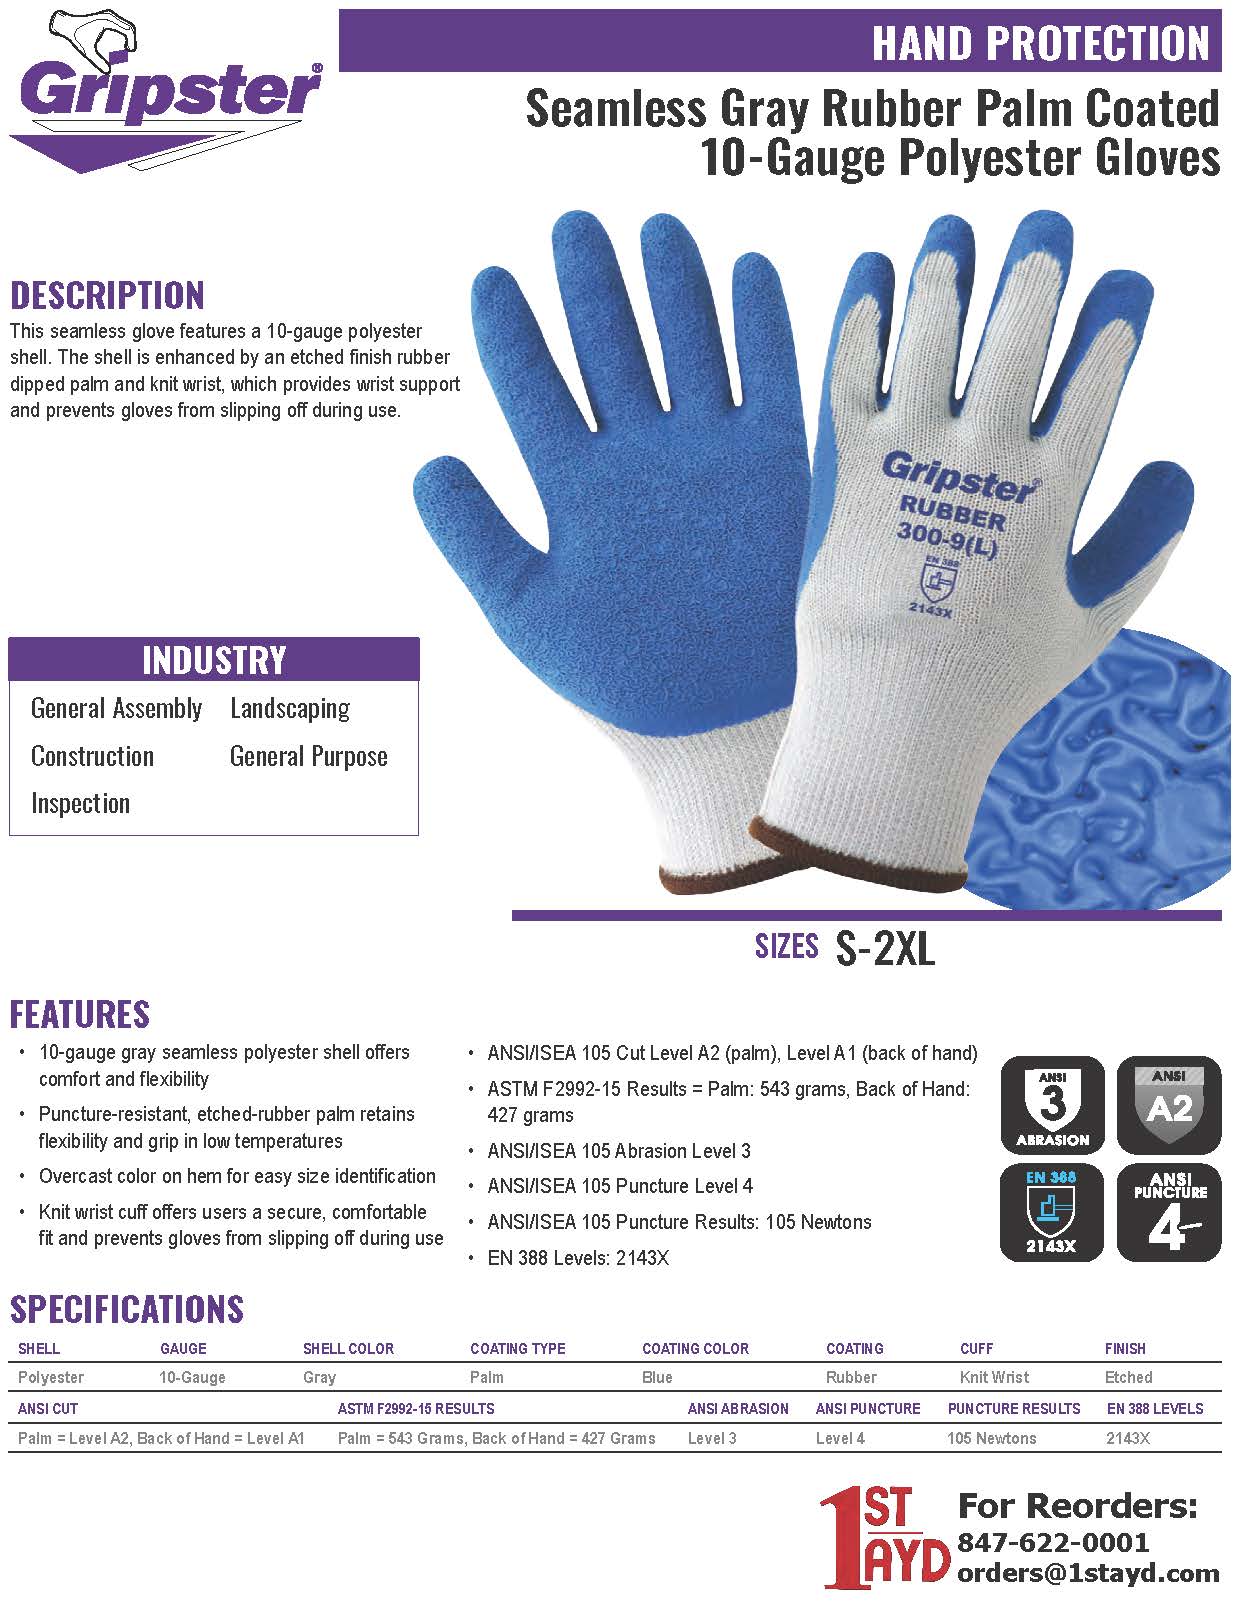 Seamless Rubber Palm Coated Polyester/Cotton Gloves - 300E